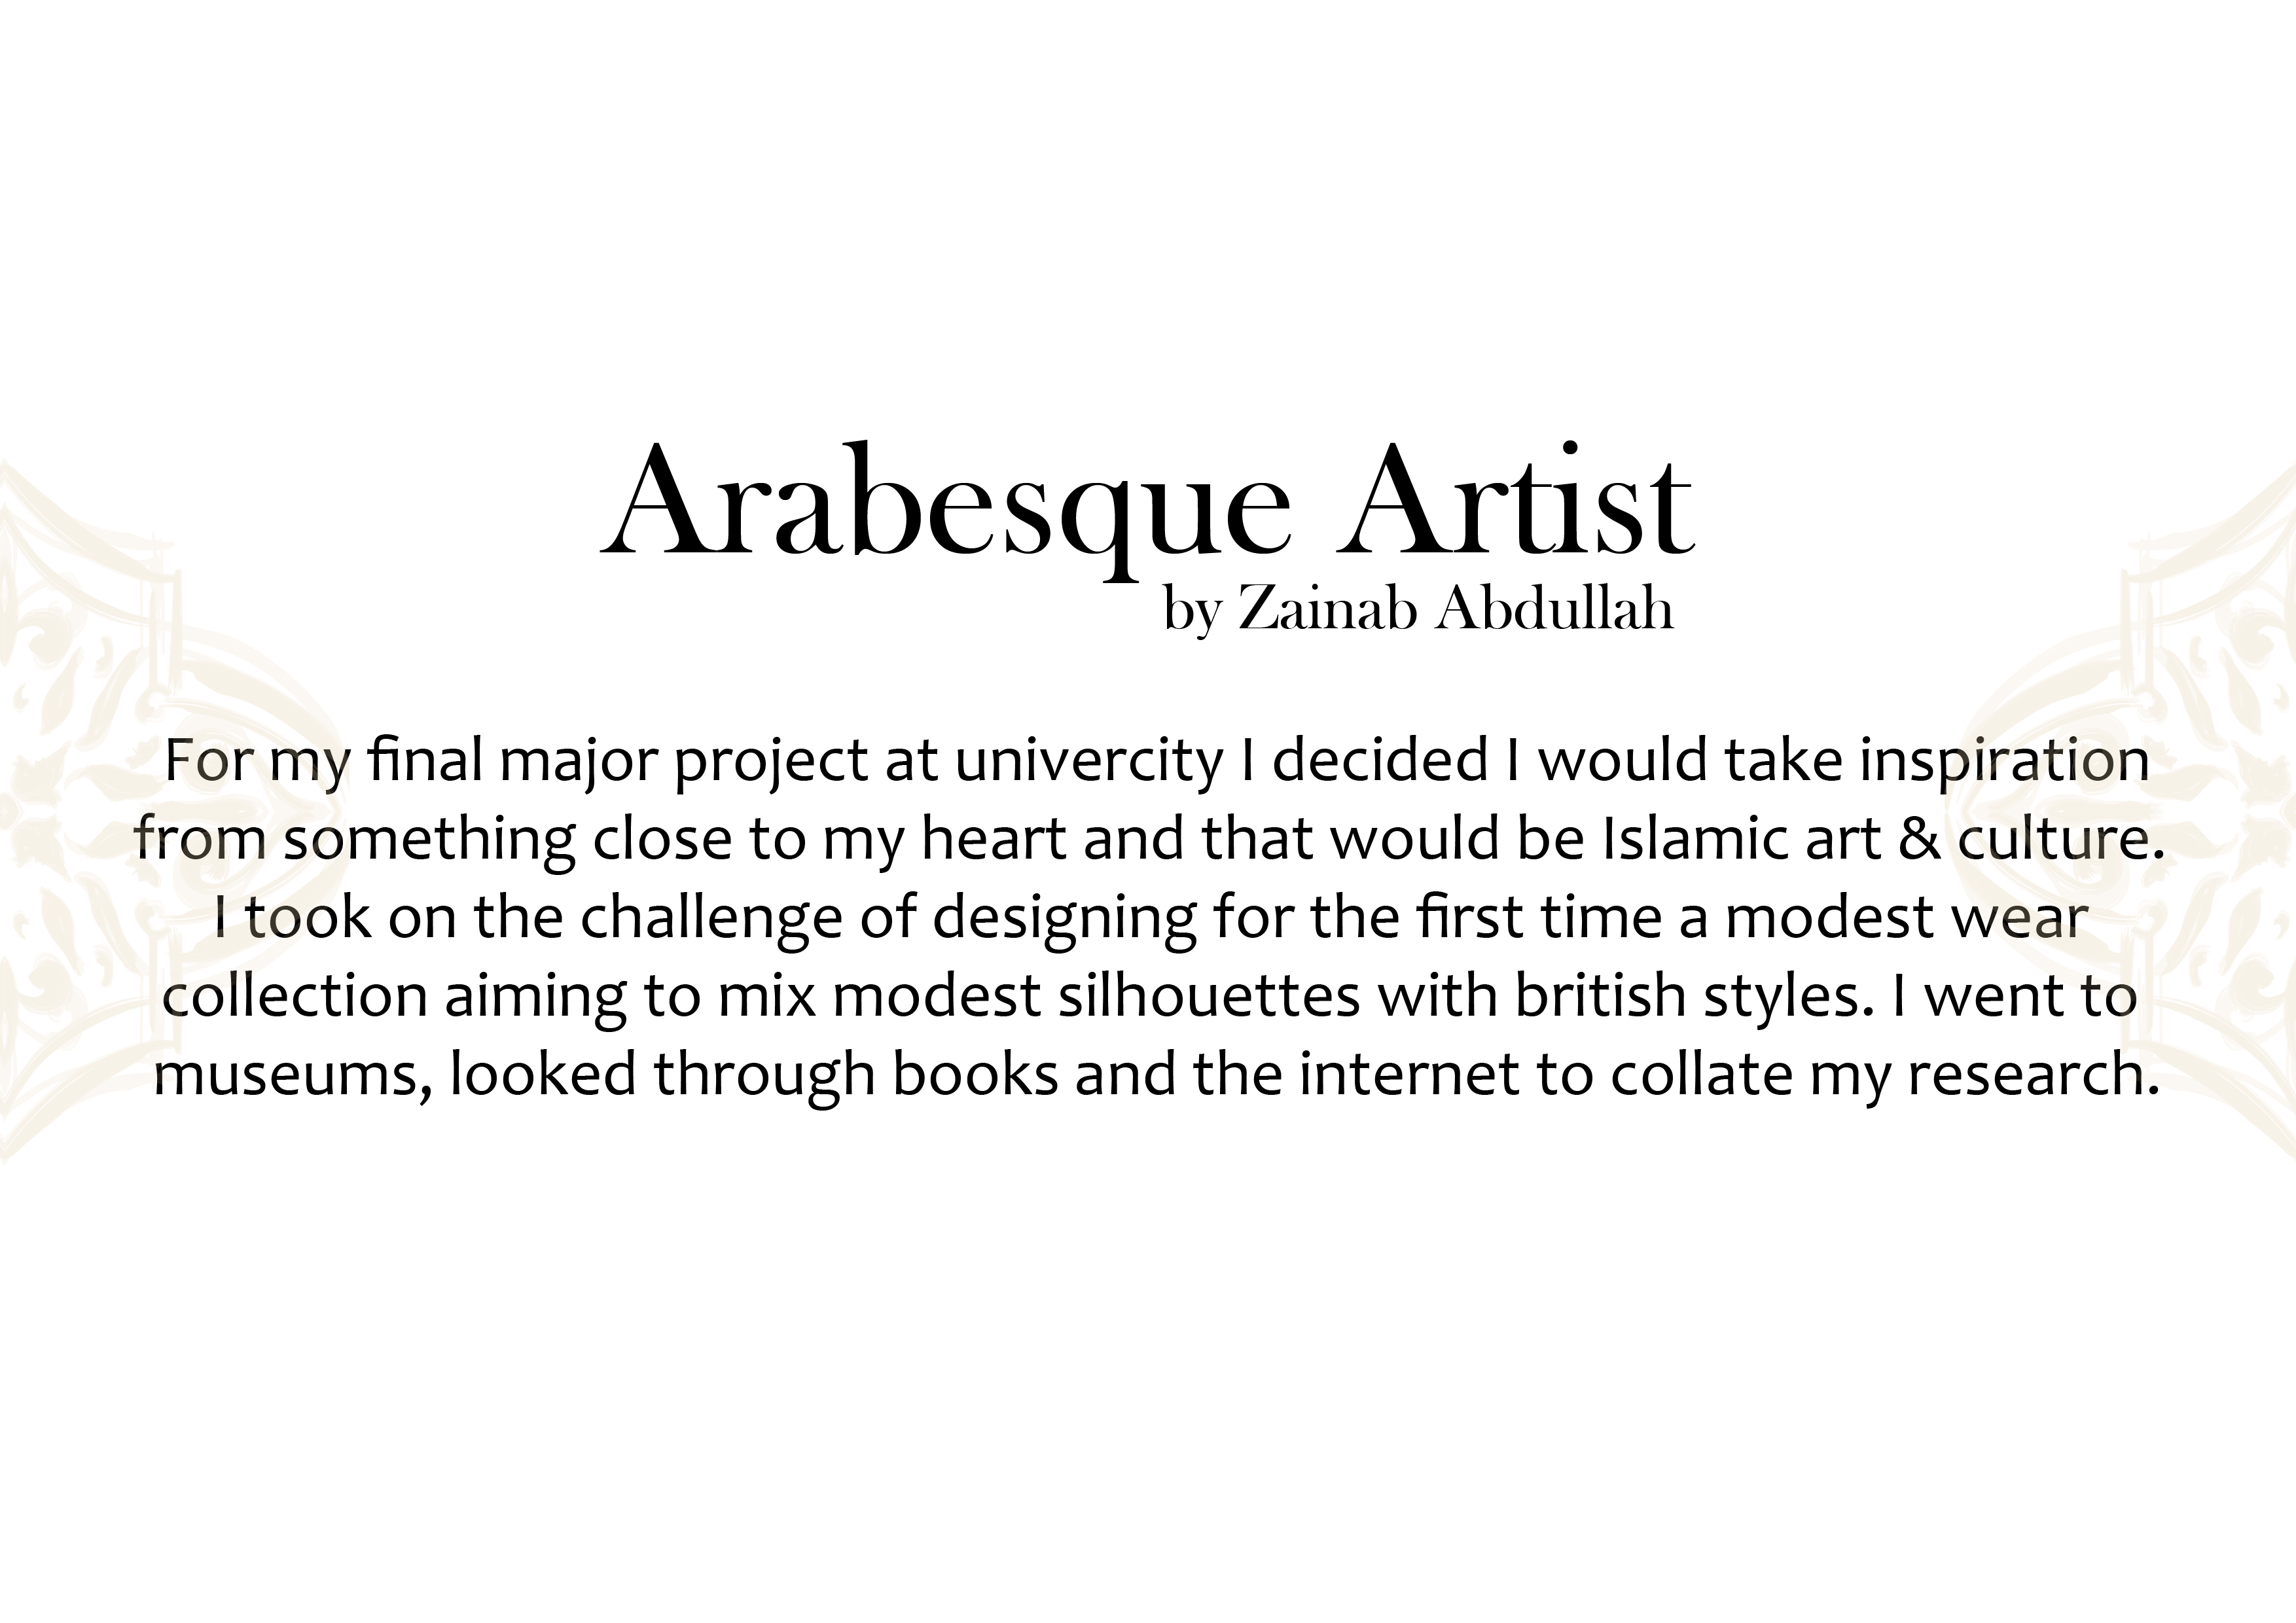 Arabesque Artist

by Zamab Abdullah

For my final major project at univercity | decided | would take inspiration
from something close to my heart and that would be Islamic art &amp; culture.
| took on the challenge of designing for the first time a modest wear
collection aiming to mix modest silhouettes with british styles. | went to
museums, looked through books and the internet to collate my research.